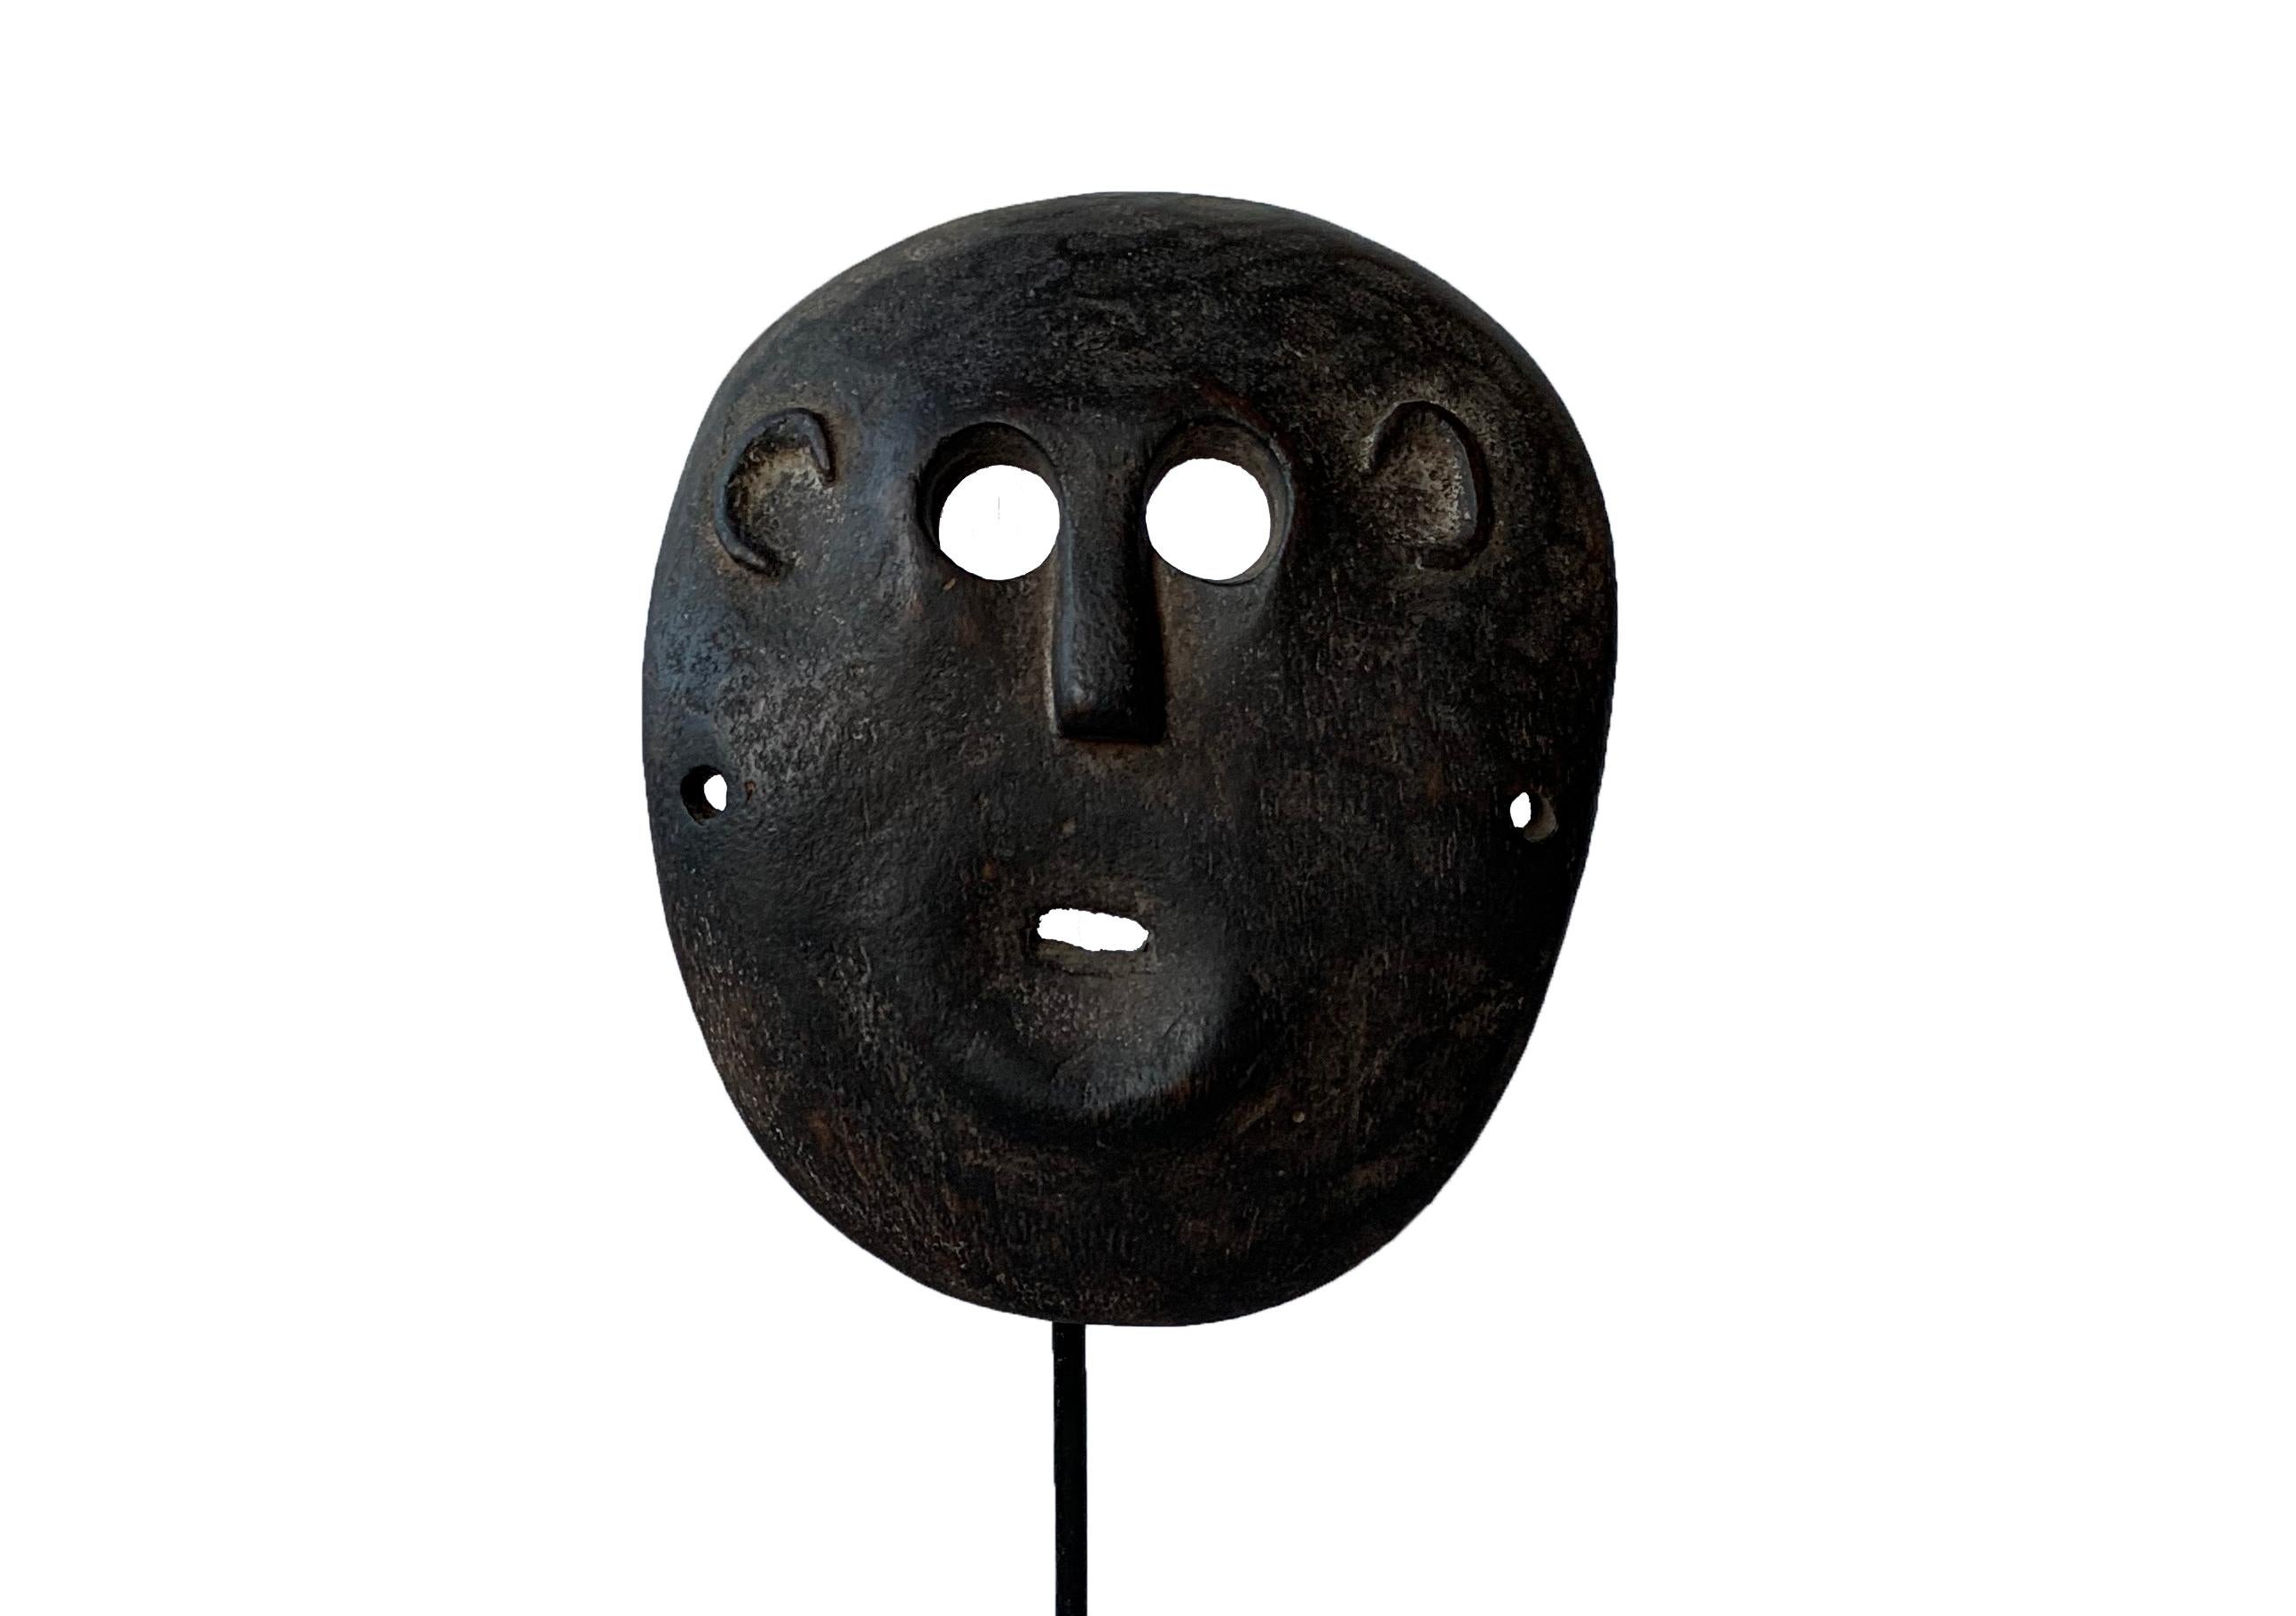 This very flat mask originates from the Atoni people of Timor. For the Timorese people masks portray both male and female ancestors, worn by warriors to scare off enemies or during ceremonies. Masks in Timor were also placed on the altar during